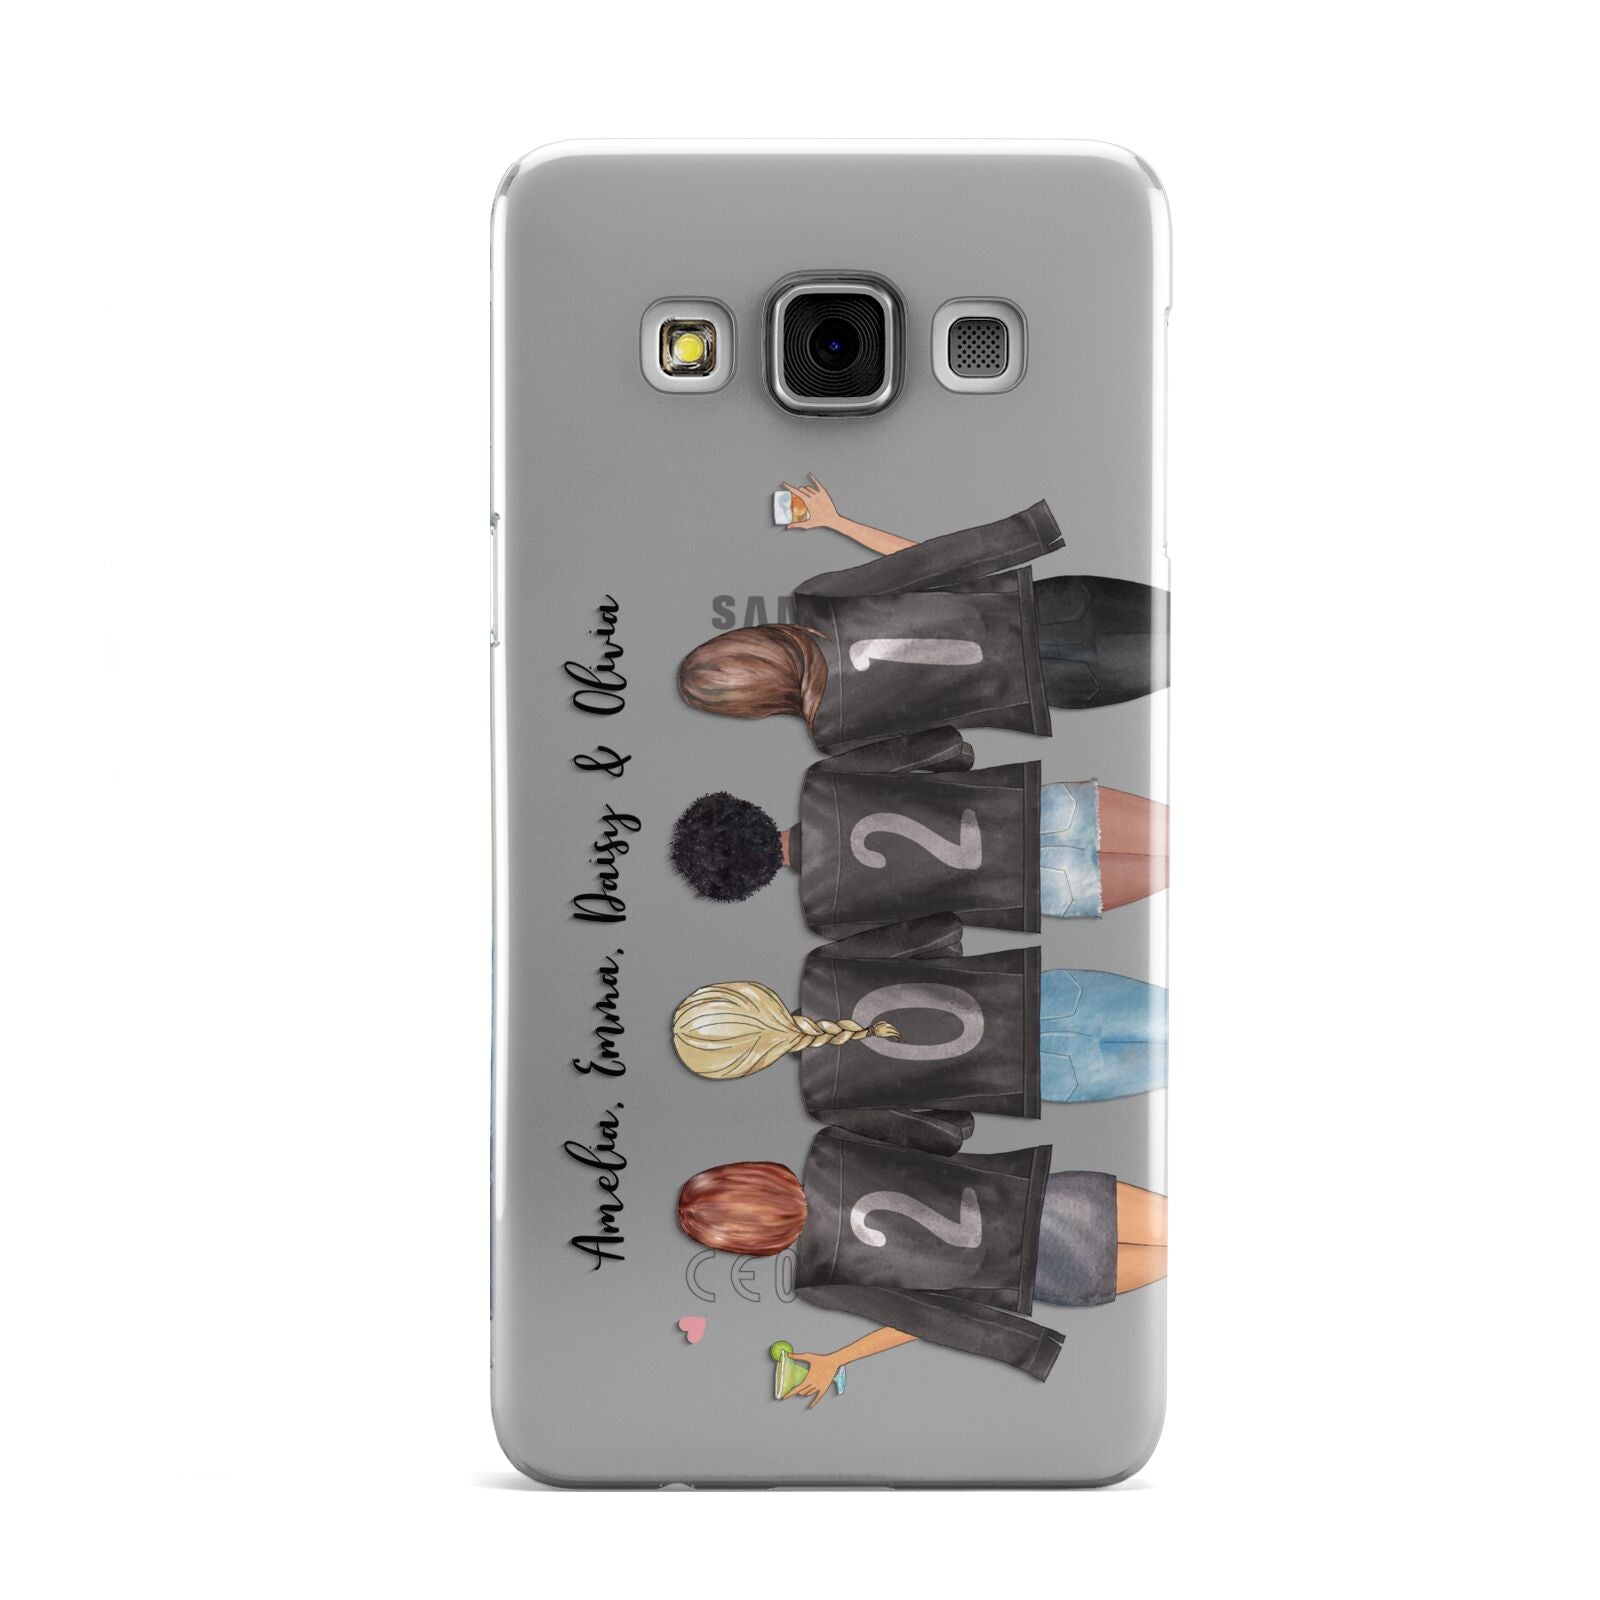 4 Best Friends with Names Samsung Galaxy A3 Case